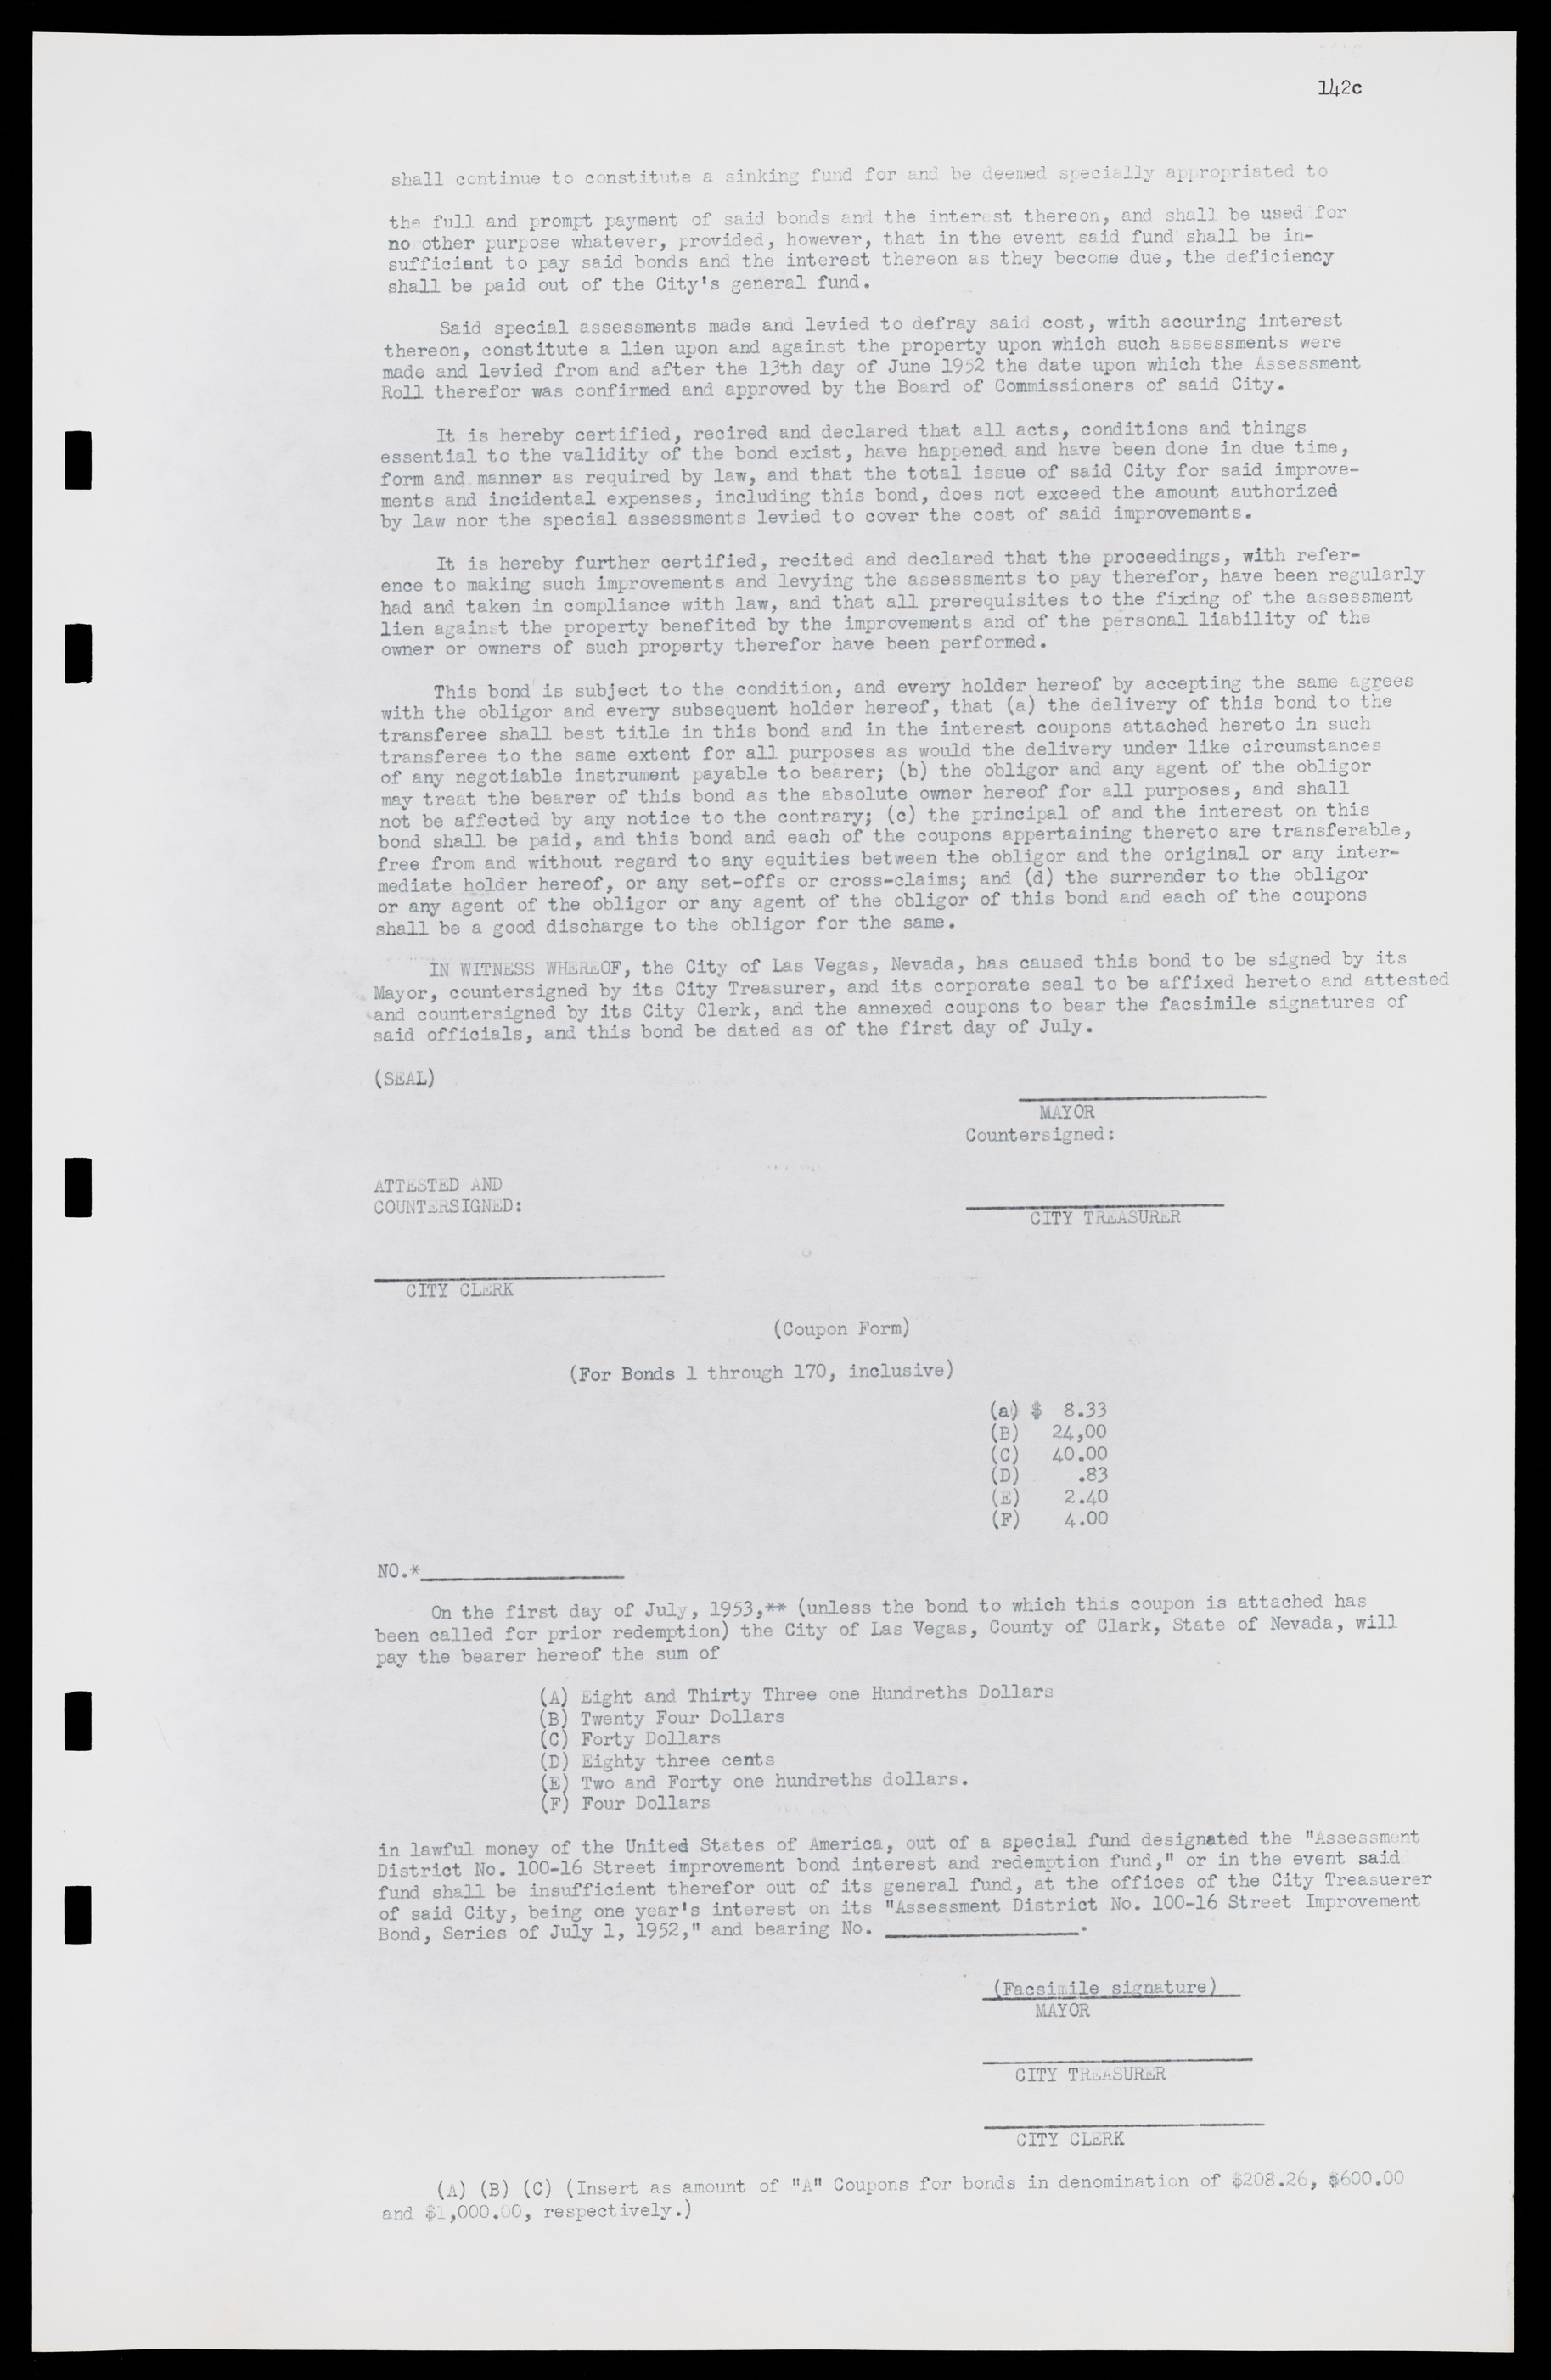 Las Vegas City Commission Minutes, May 26, 1952 to February 17, 1954, lvc000008-151